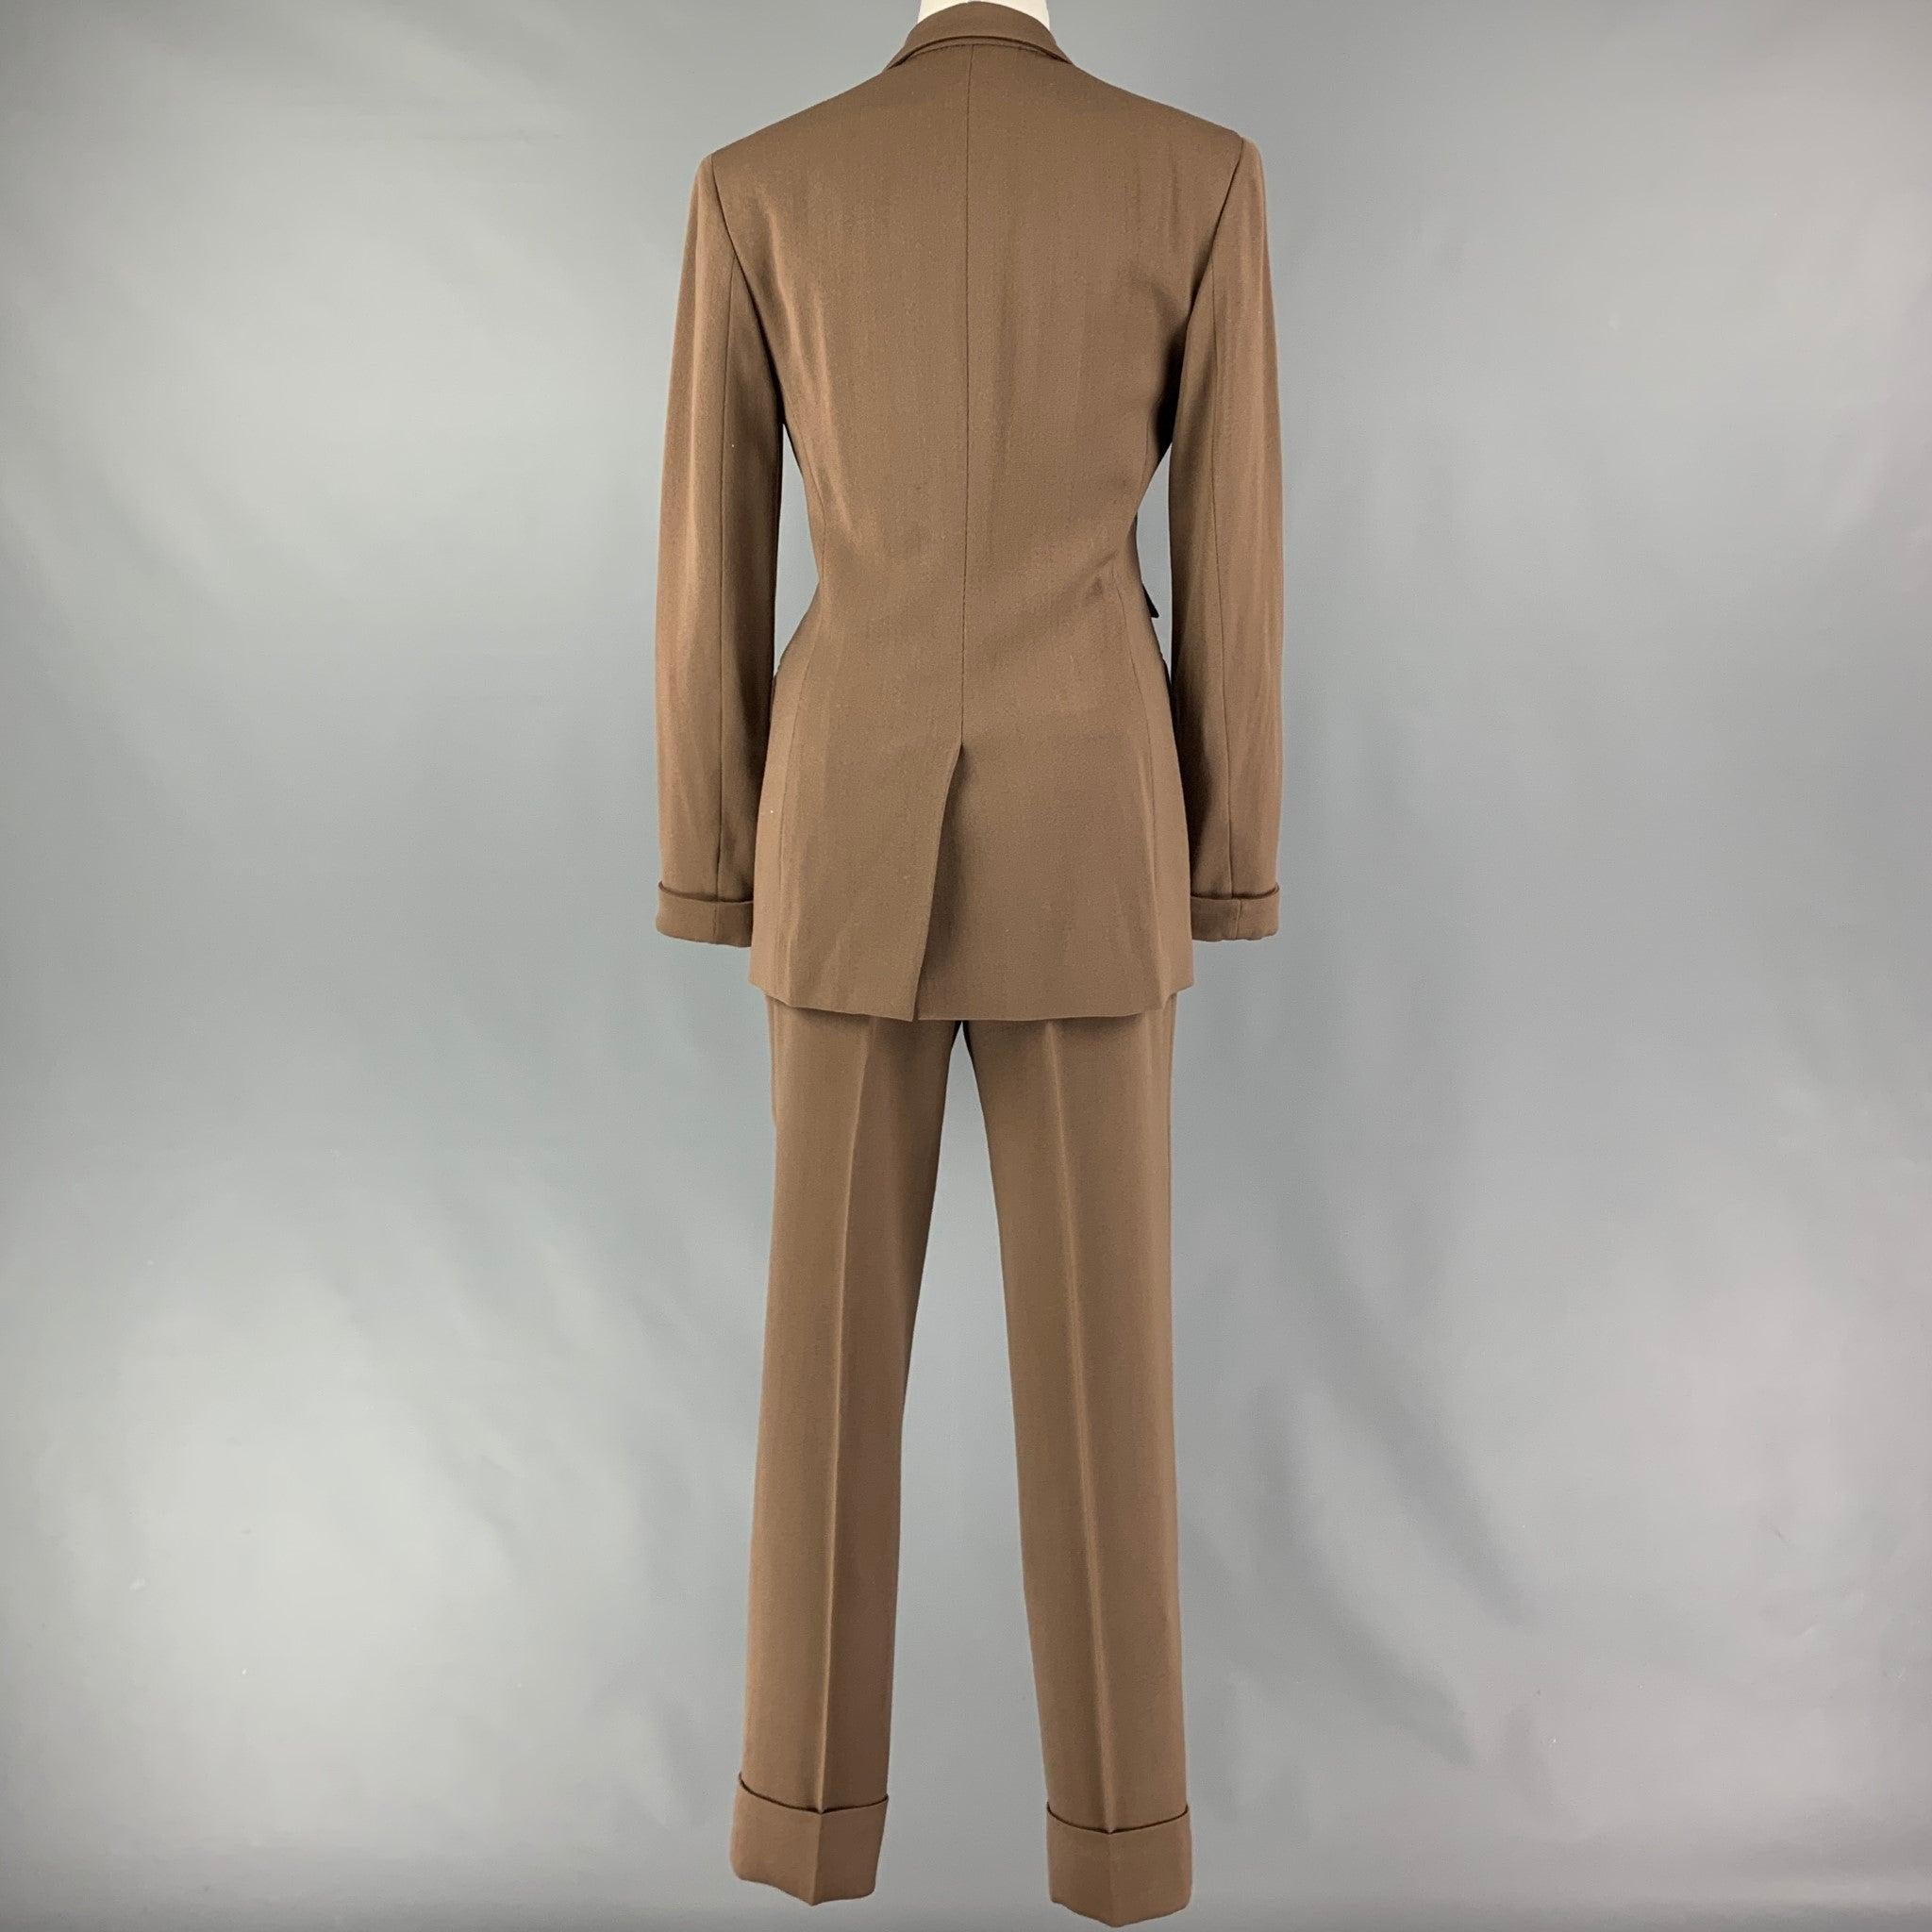 RALPH LAUREN Purple Label Size 2 Tan Wool Double Breasted Pants Suit In Good Condition For Sale In San Francisco, CA